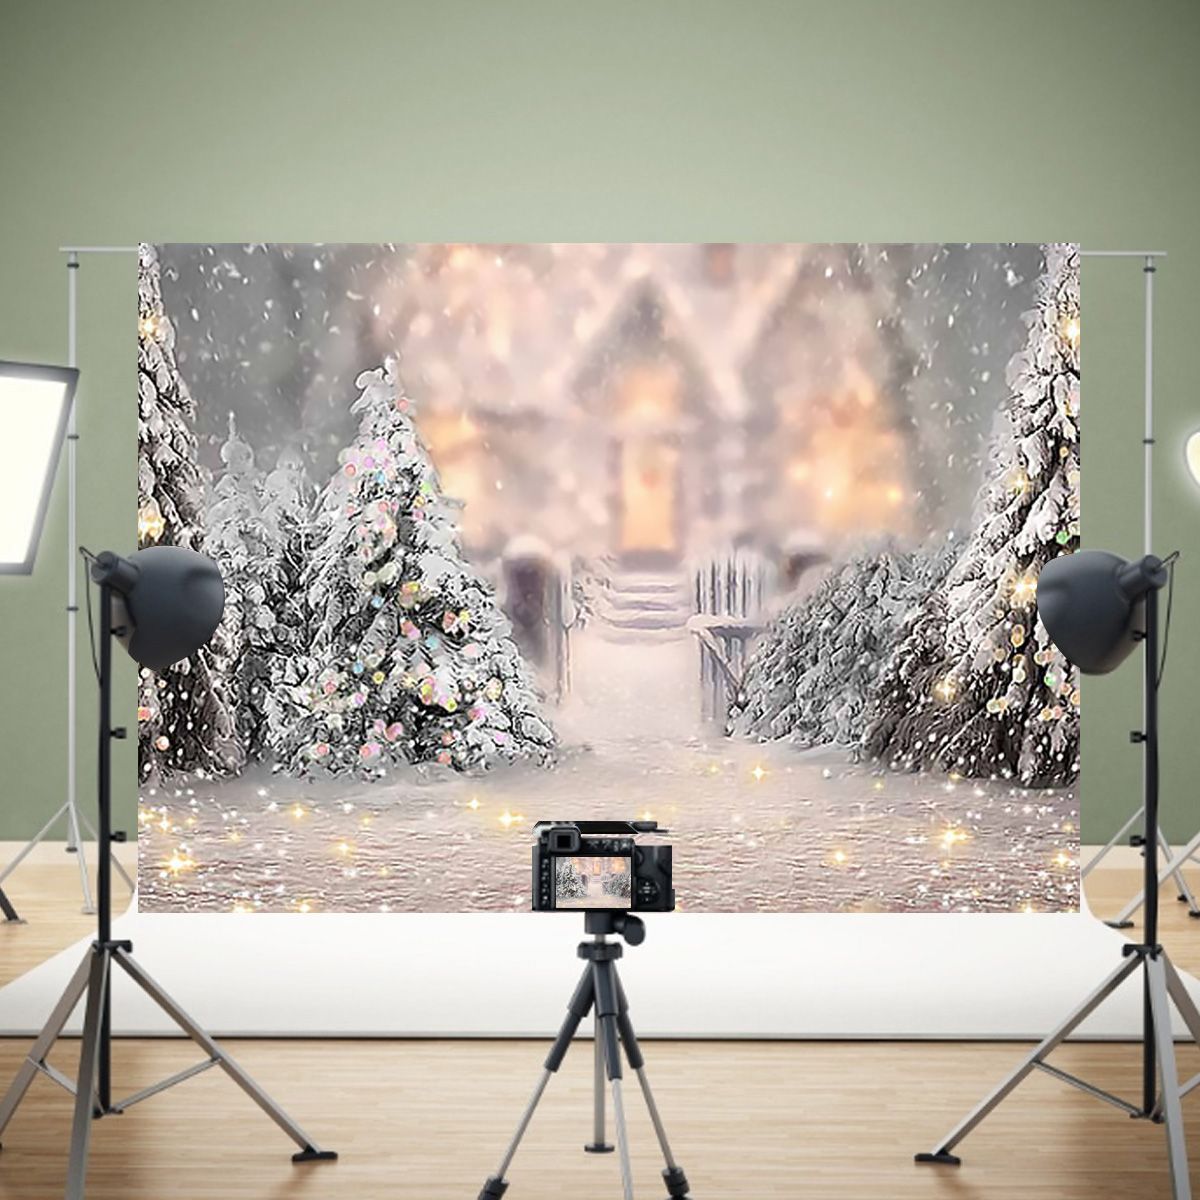 15x09m22x15m27x18m-Christmas-Photography-Backdrops-Snow-Scene-Background-Cloth-for-Studio-Photo-Back-1763675